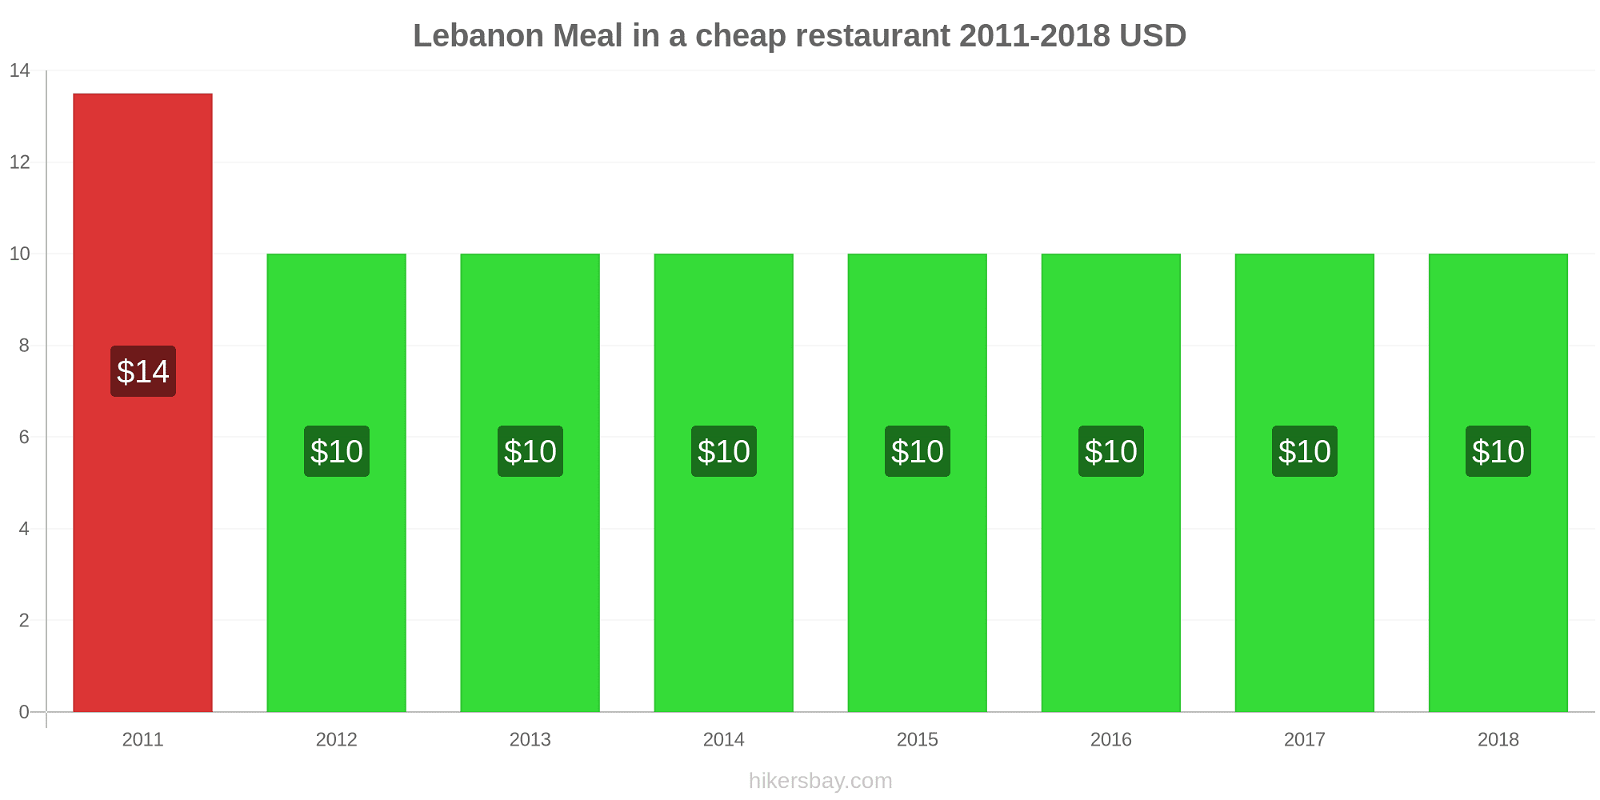 Lebanon price changes Meal in a cheap restaurant hikersbay.com